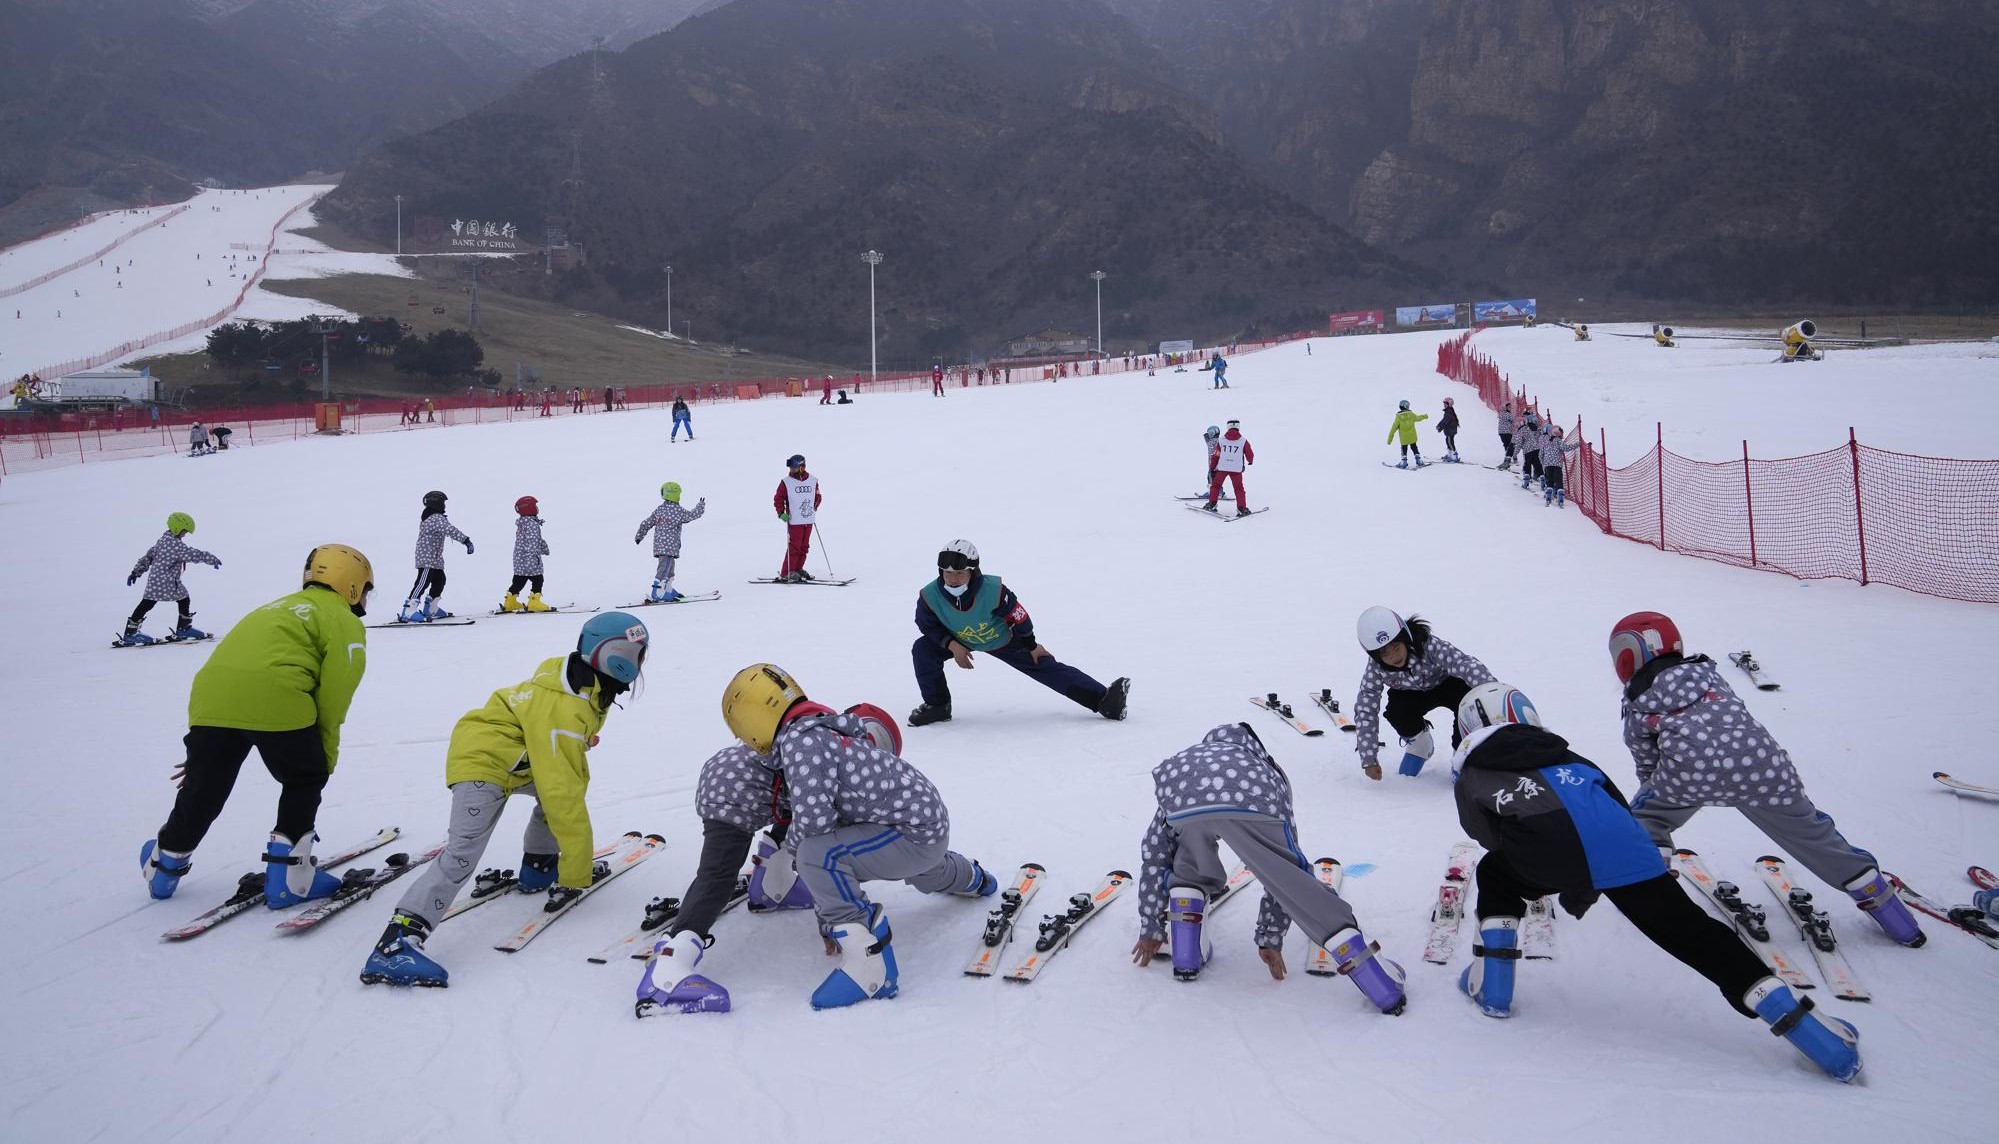 china-skis-olympics-brings-on-boom-in-winter-sports-photo-feature